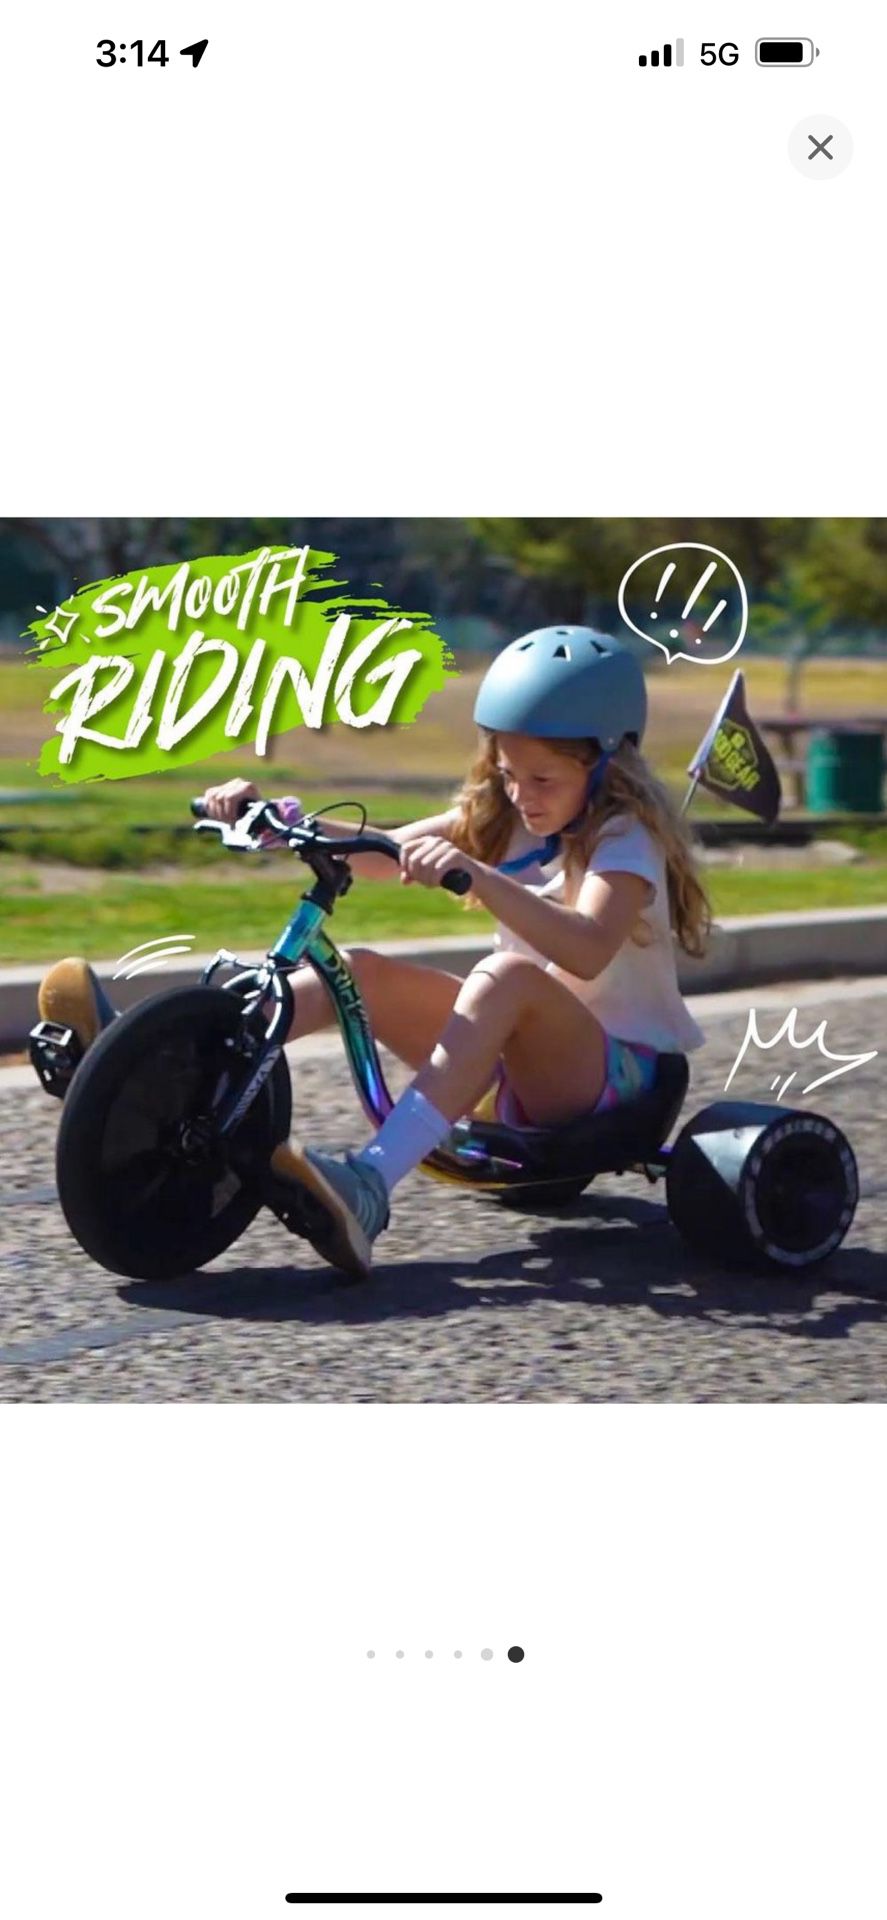 Madd Gear Drift Trike – Big Wheel Drifting Tricycle for Ages 5+ with Strong Steel Frame - Max Rider Weight 150lbs - Chopper Style Ride-On Kids Bike - 